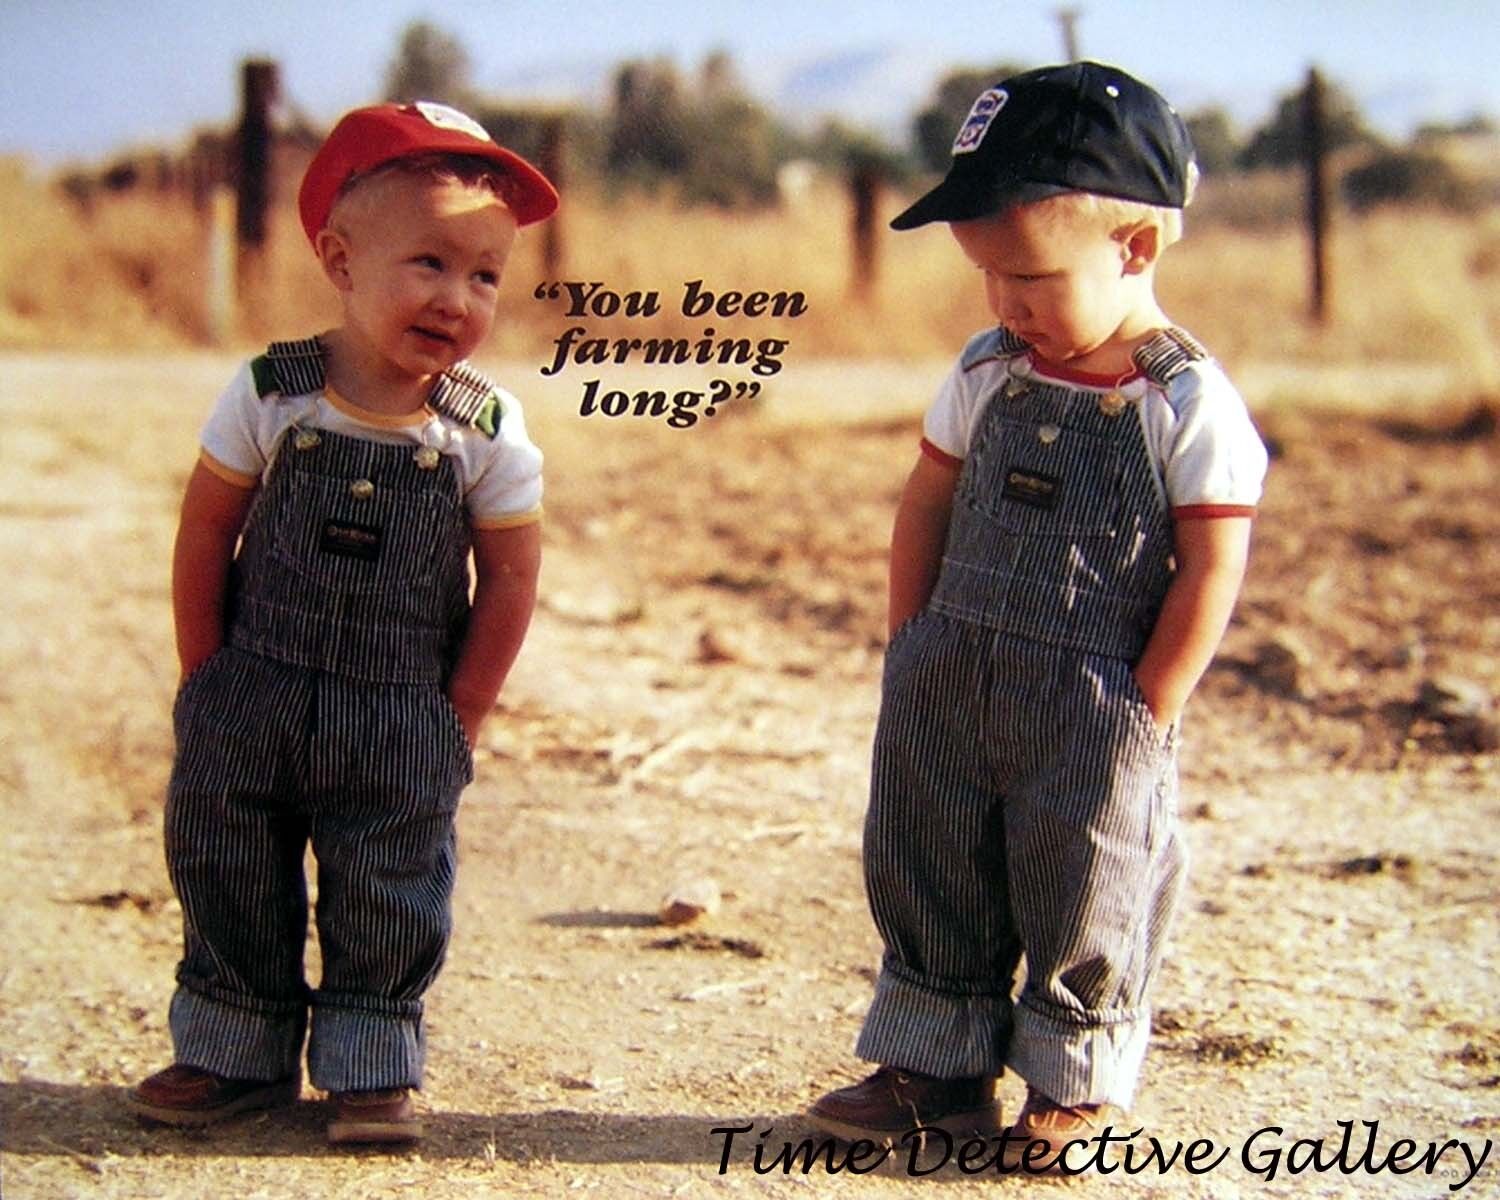 You Been Farming Long?  Boys in Overalls - Color Photo Print